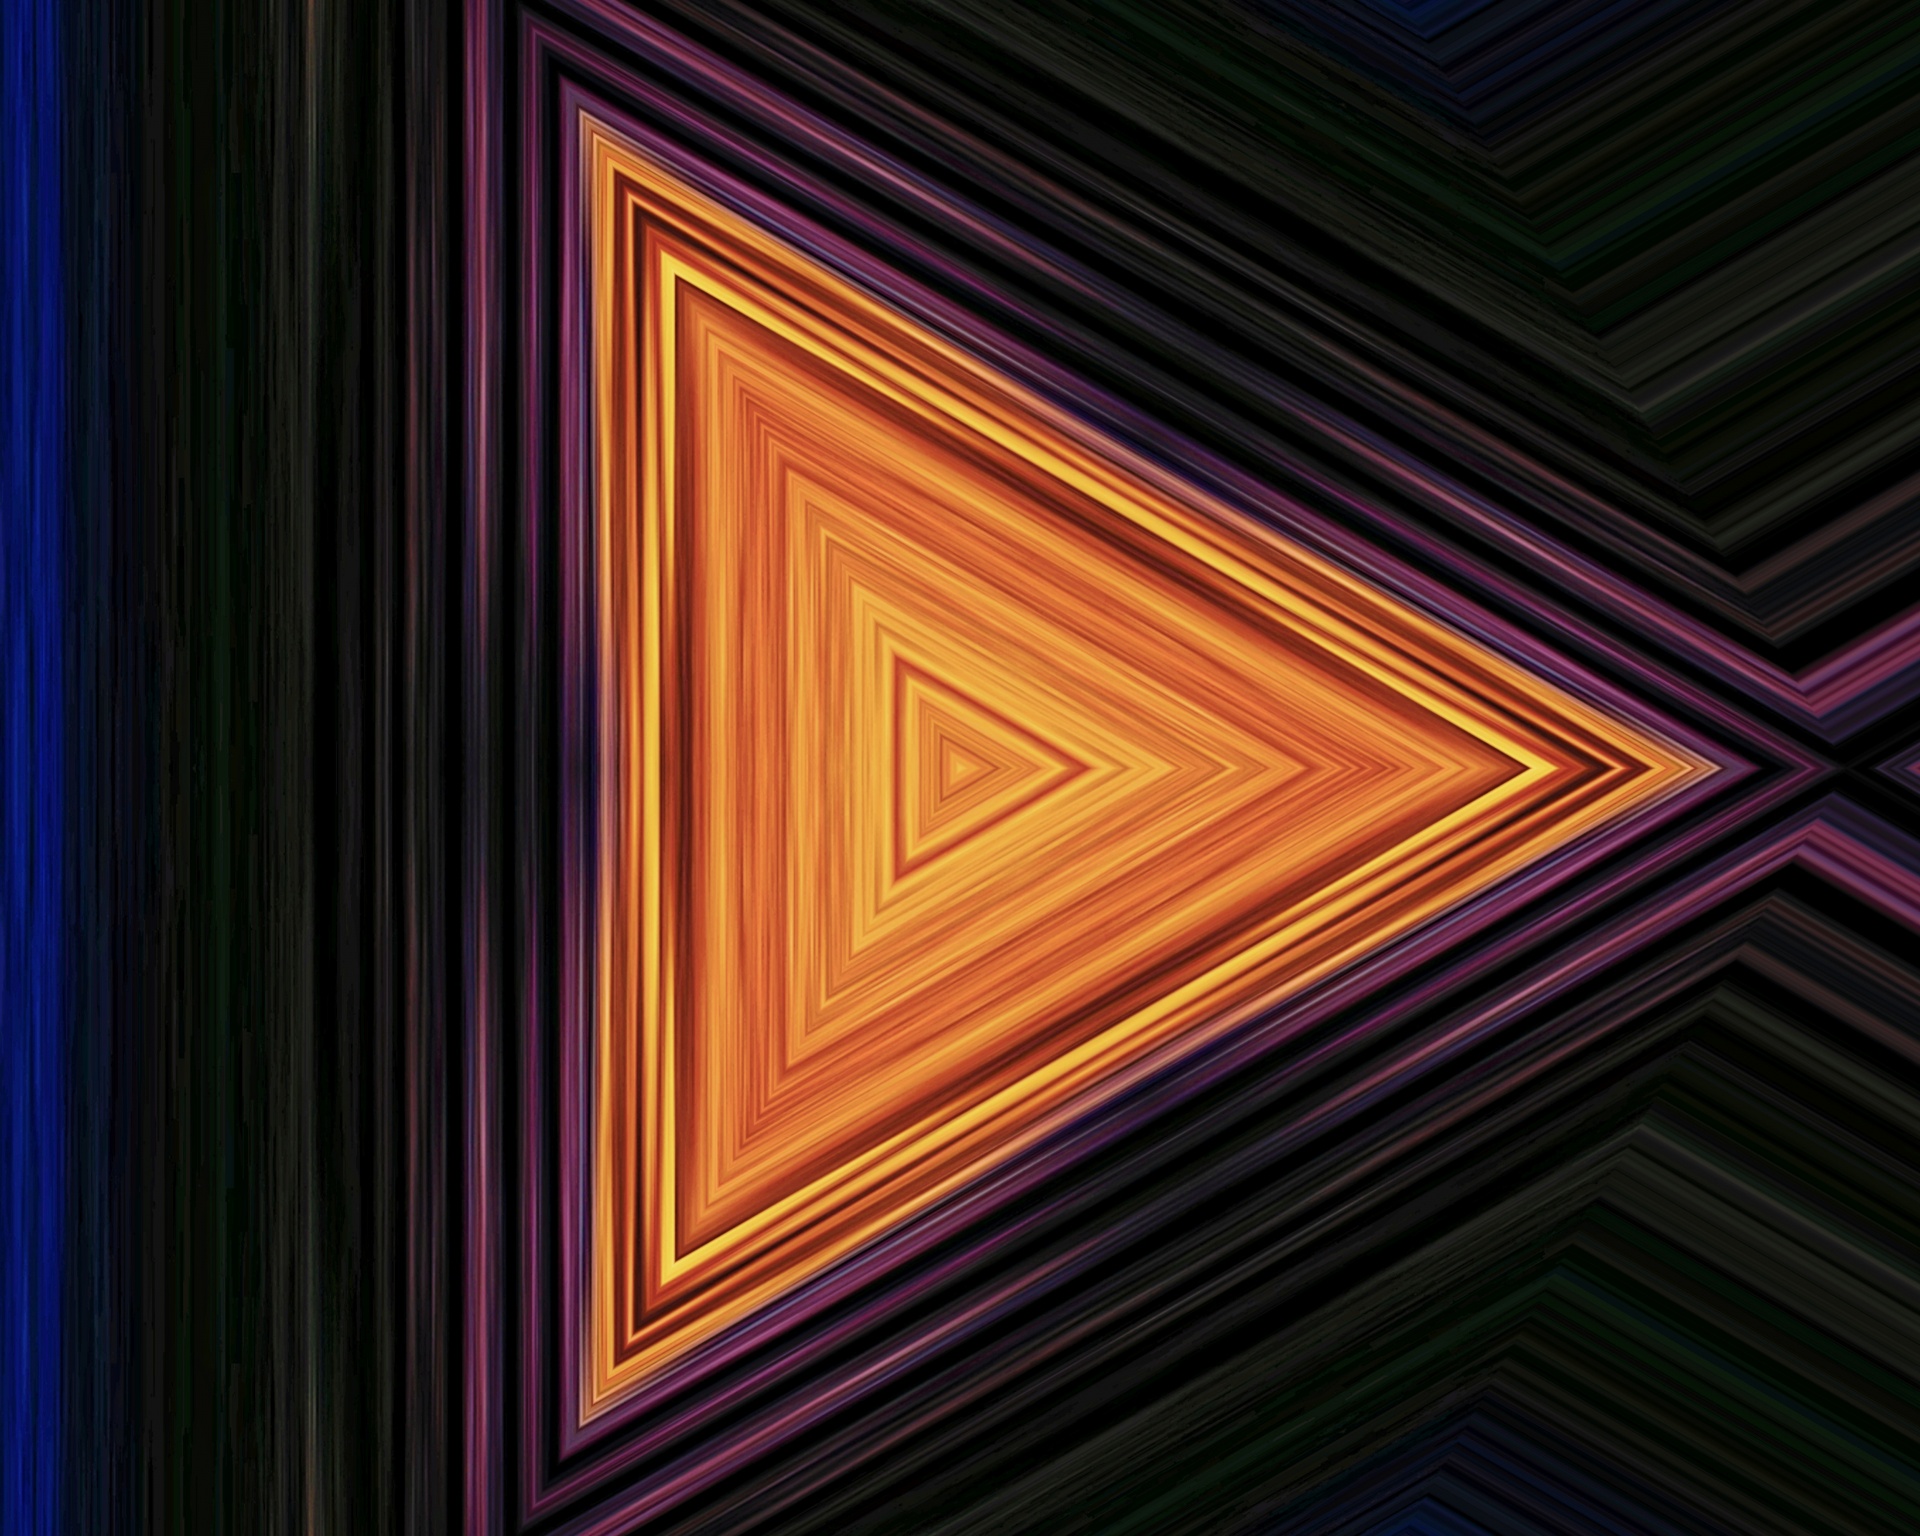 Abstract Triangle